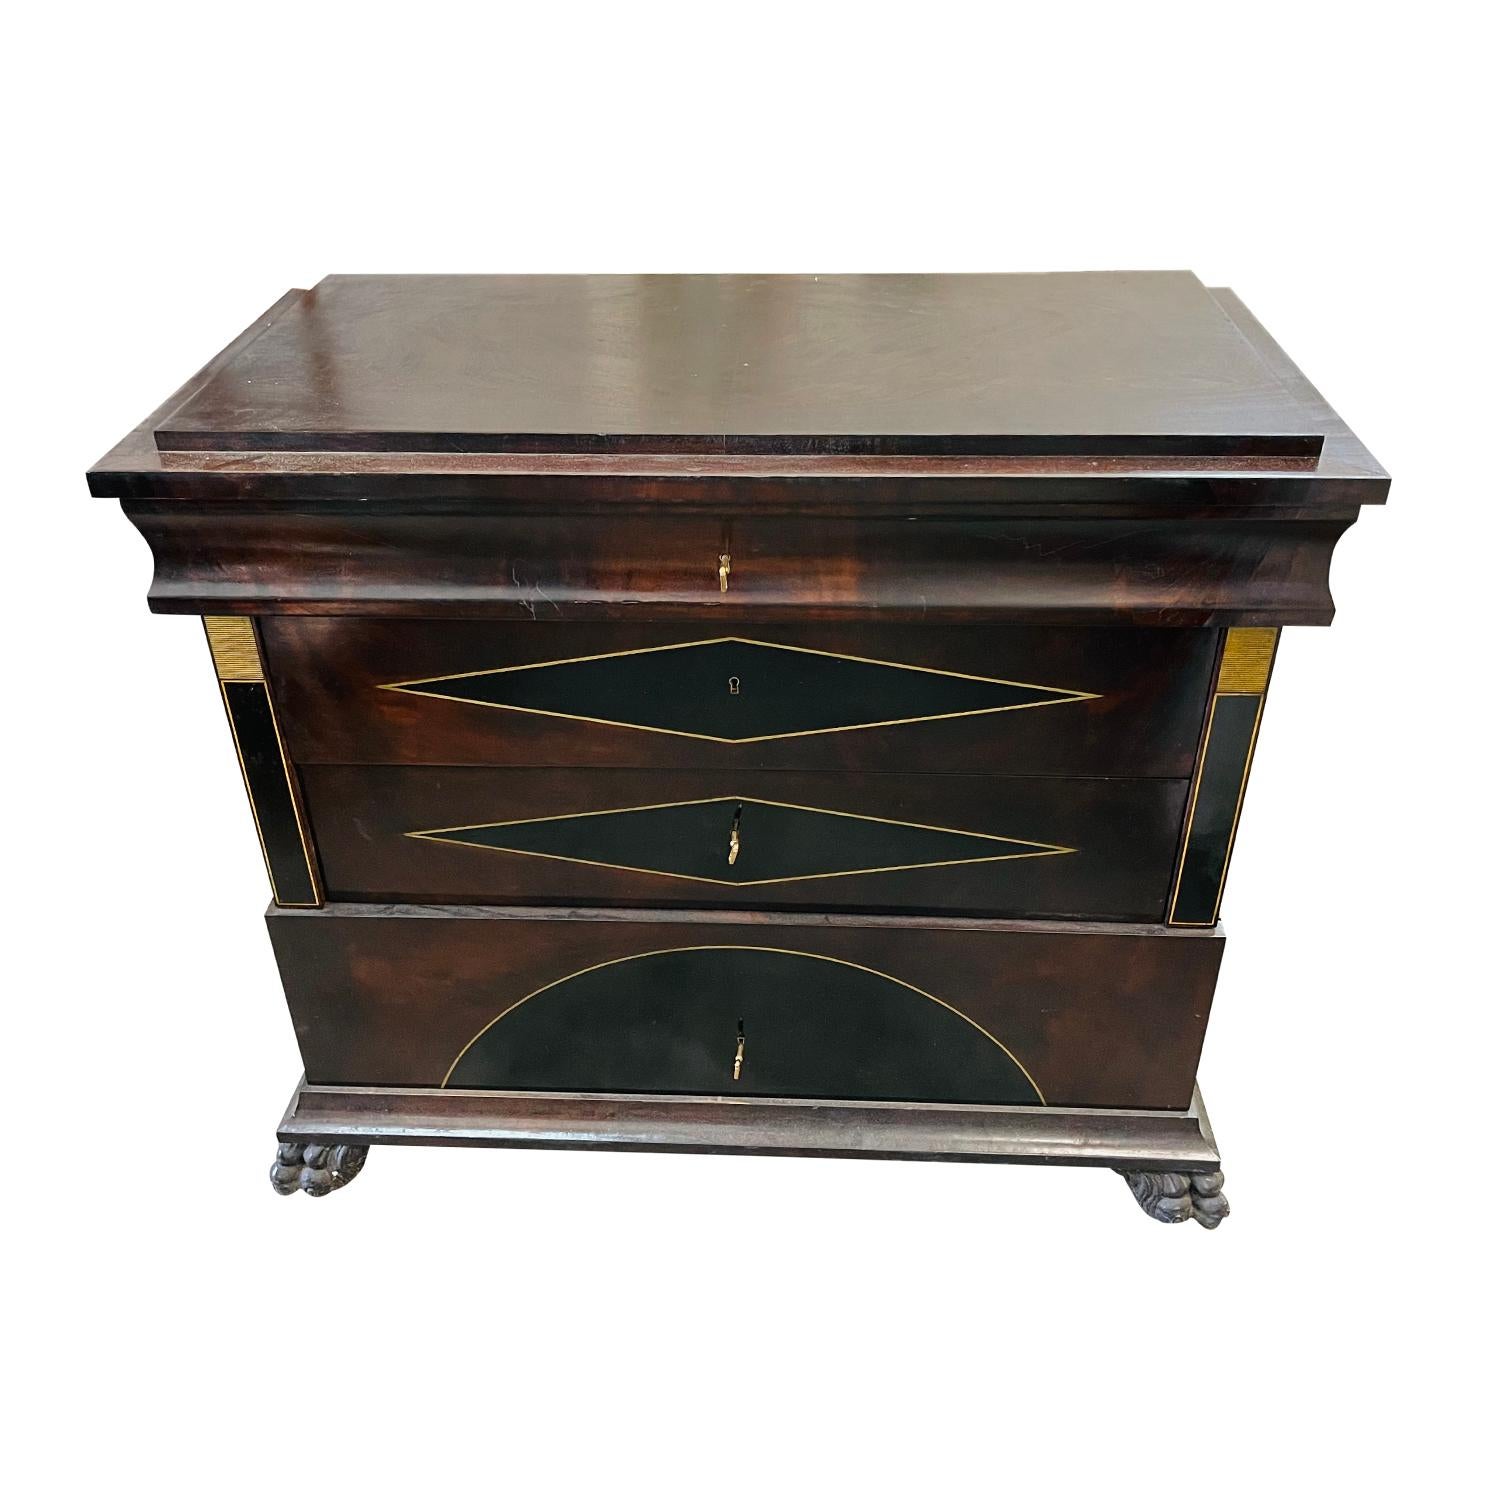 A late 19th Century, antique European commode made of hand crafted polished, partly veneered Mahogany in good condition. The commode is composed with four drawers, standing on two back wooden feet, supported on the front by two detailed carved lion